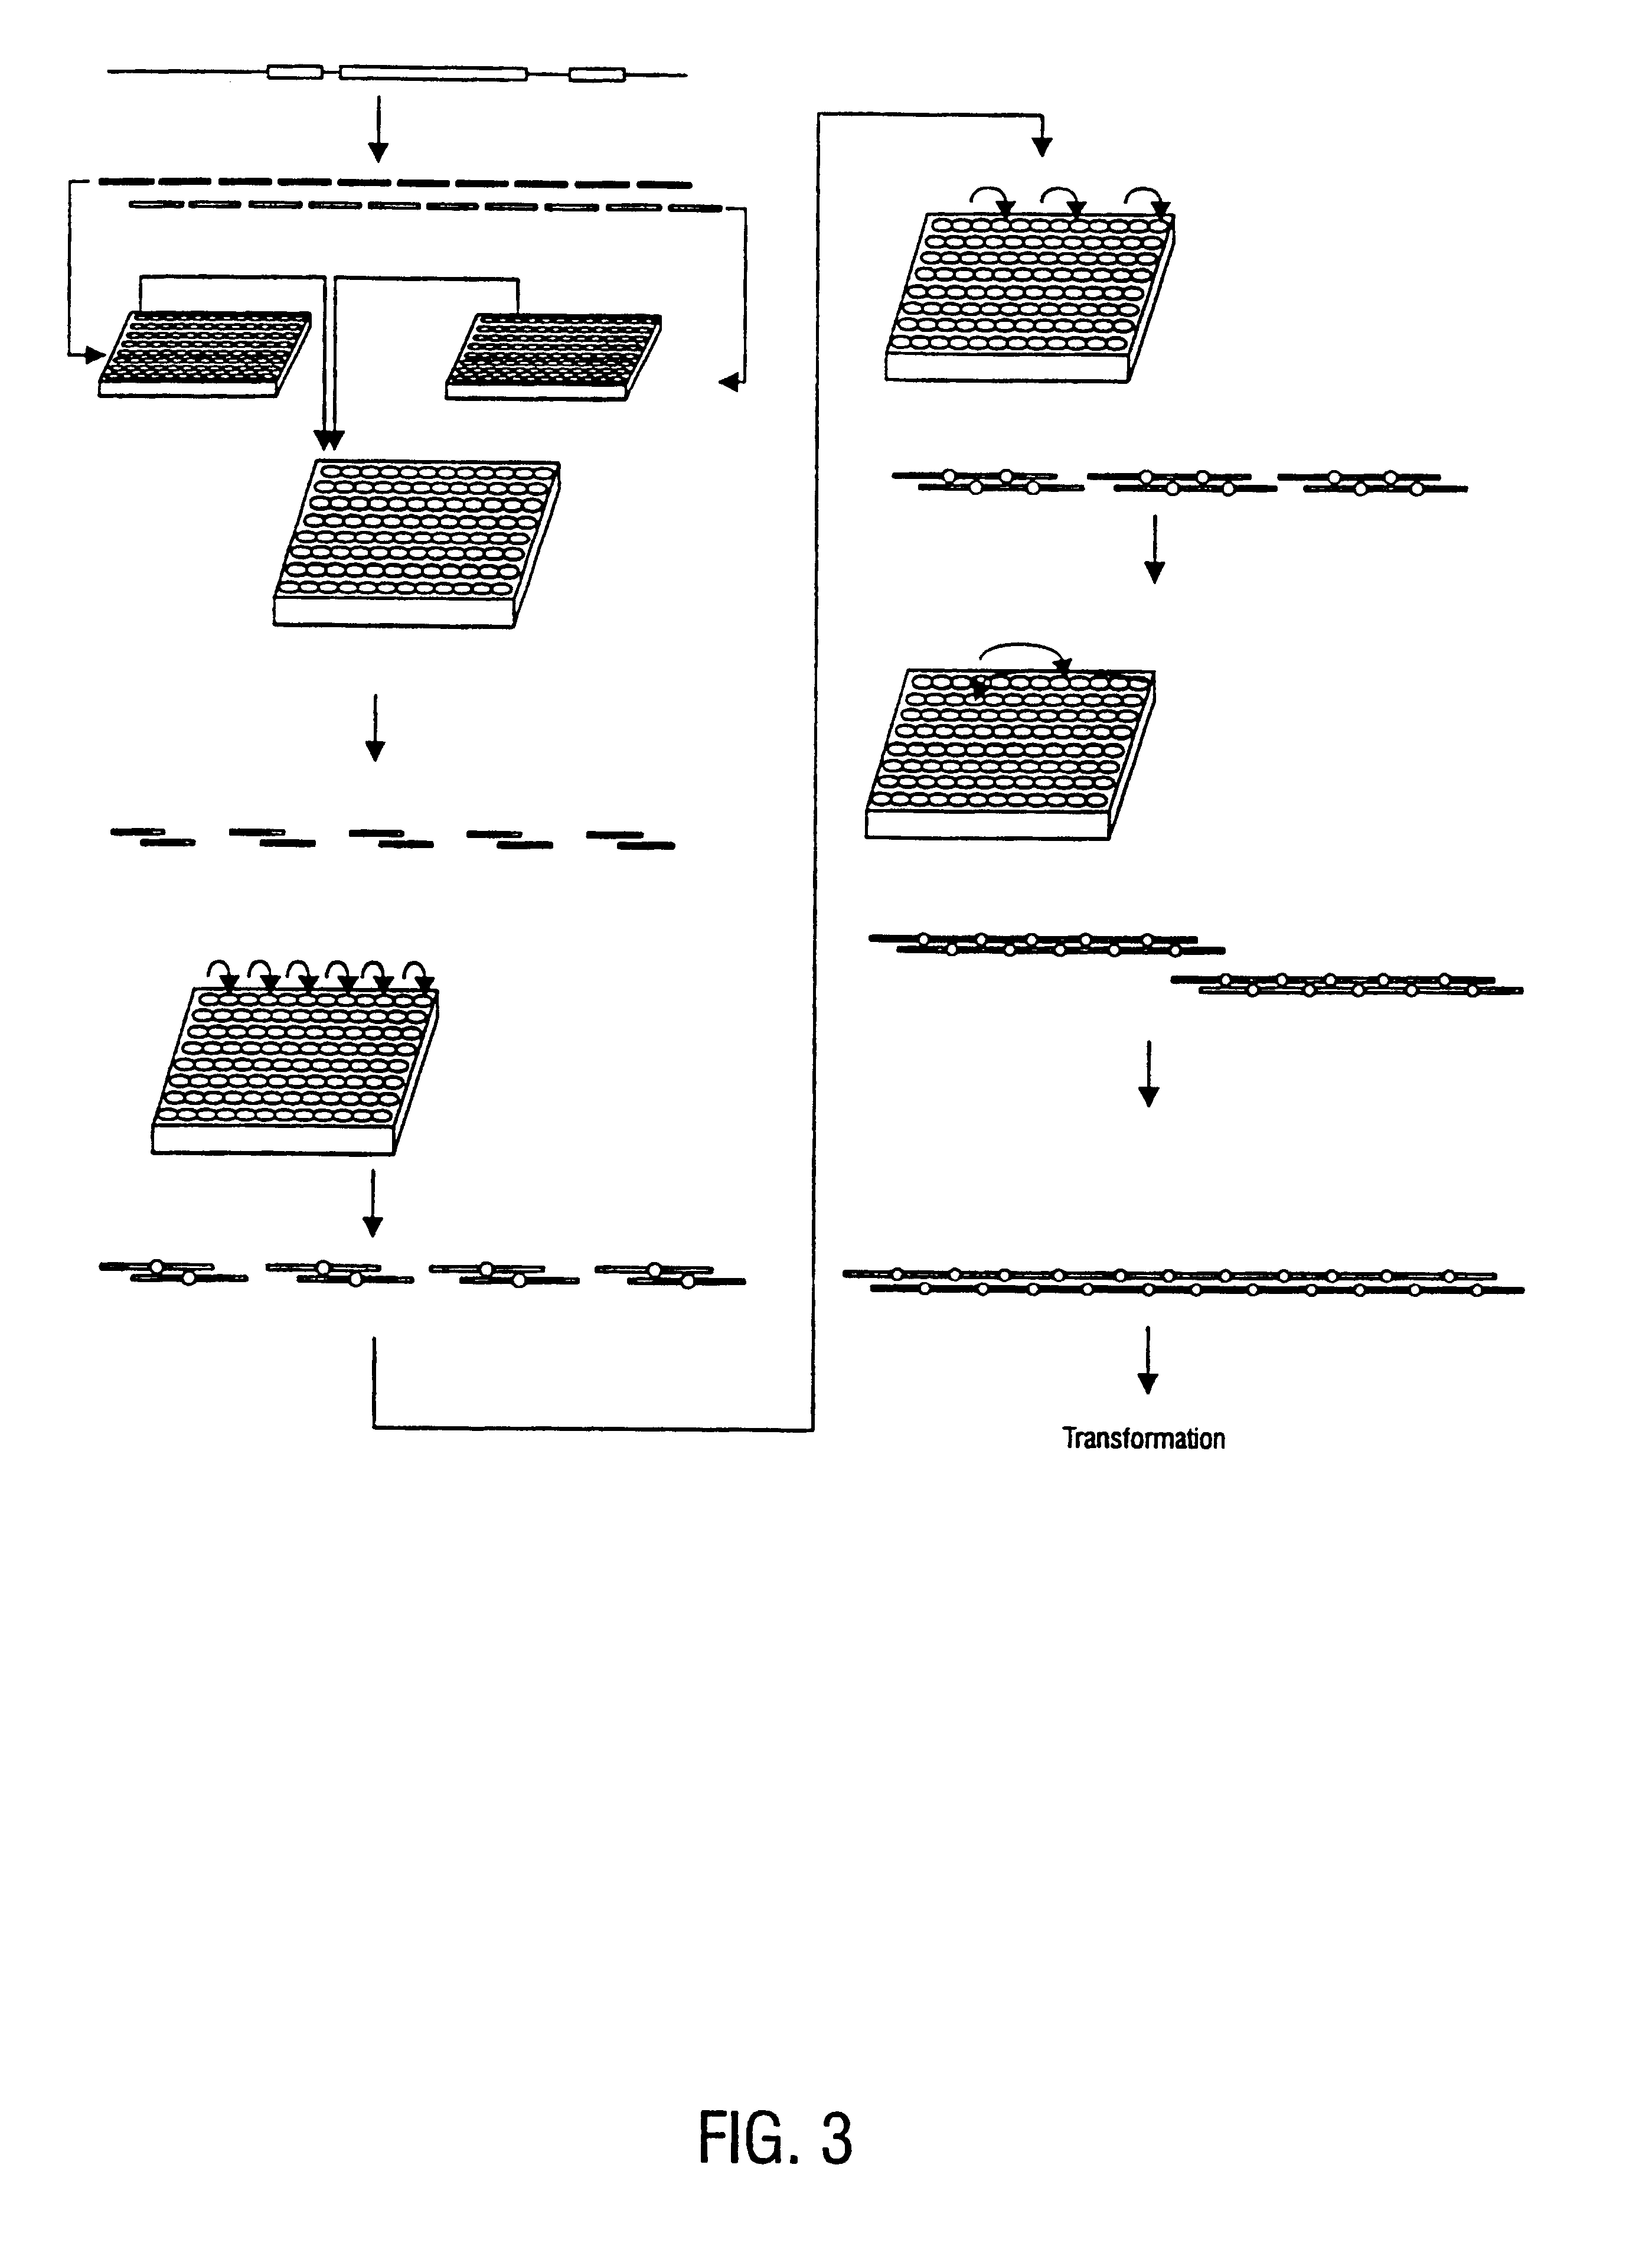 Method for the complete chemical synthesis and assembly of genes and genomes